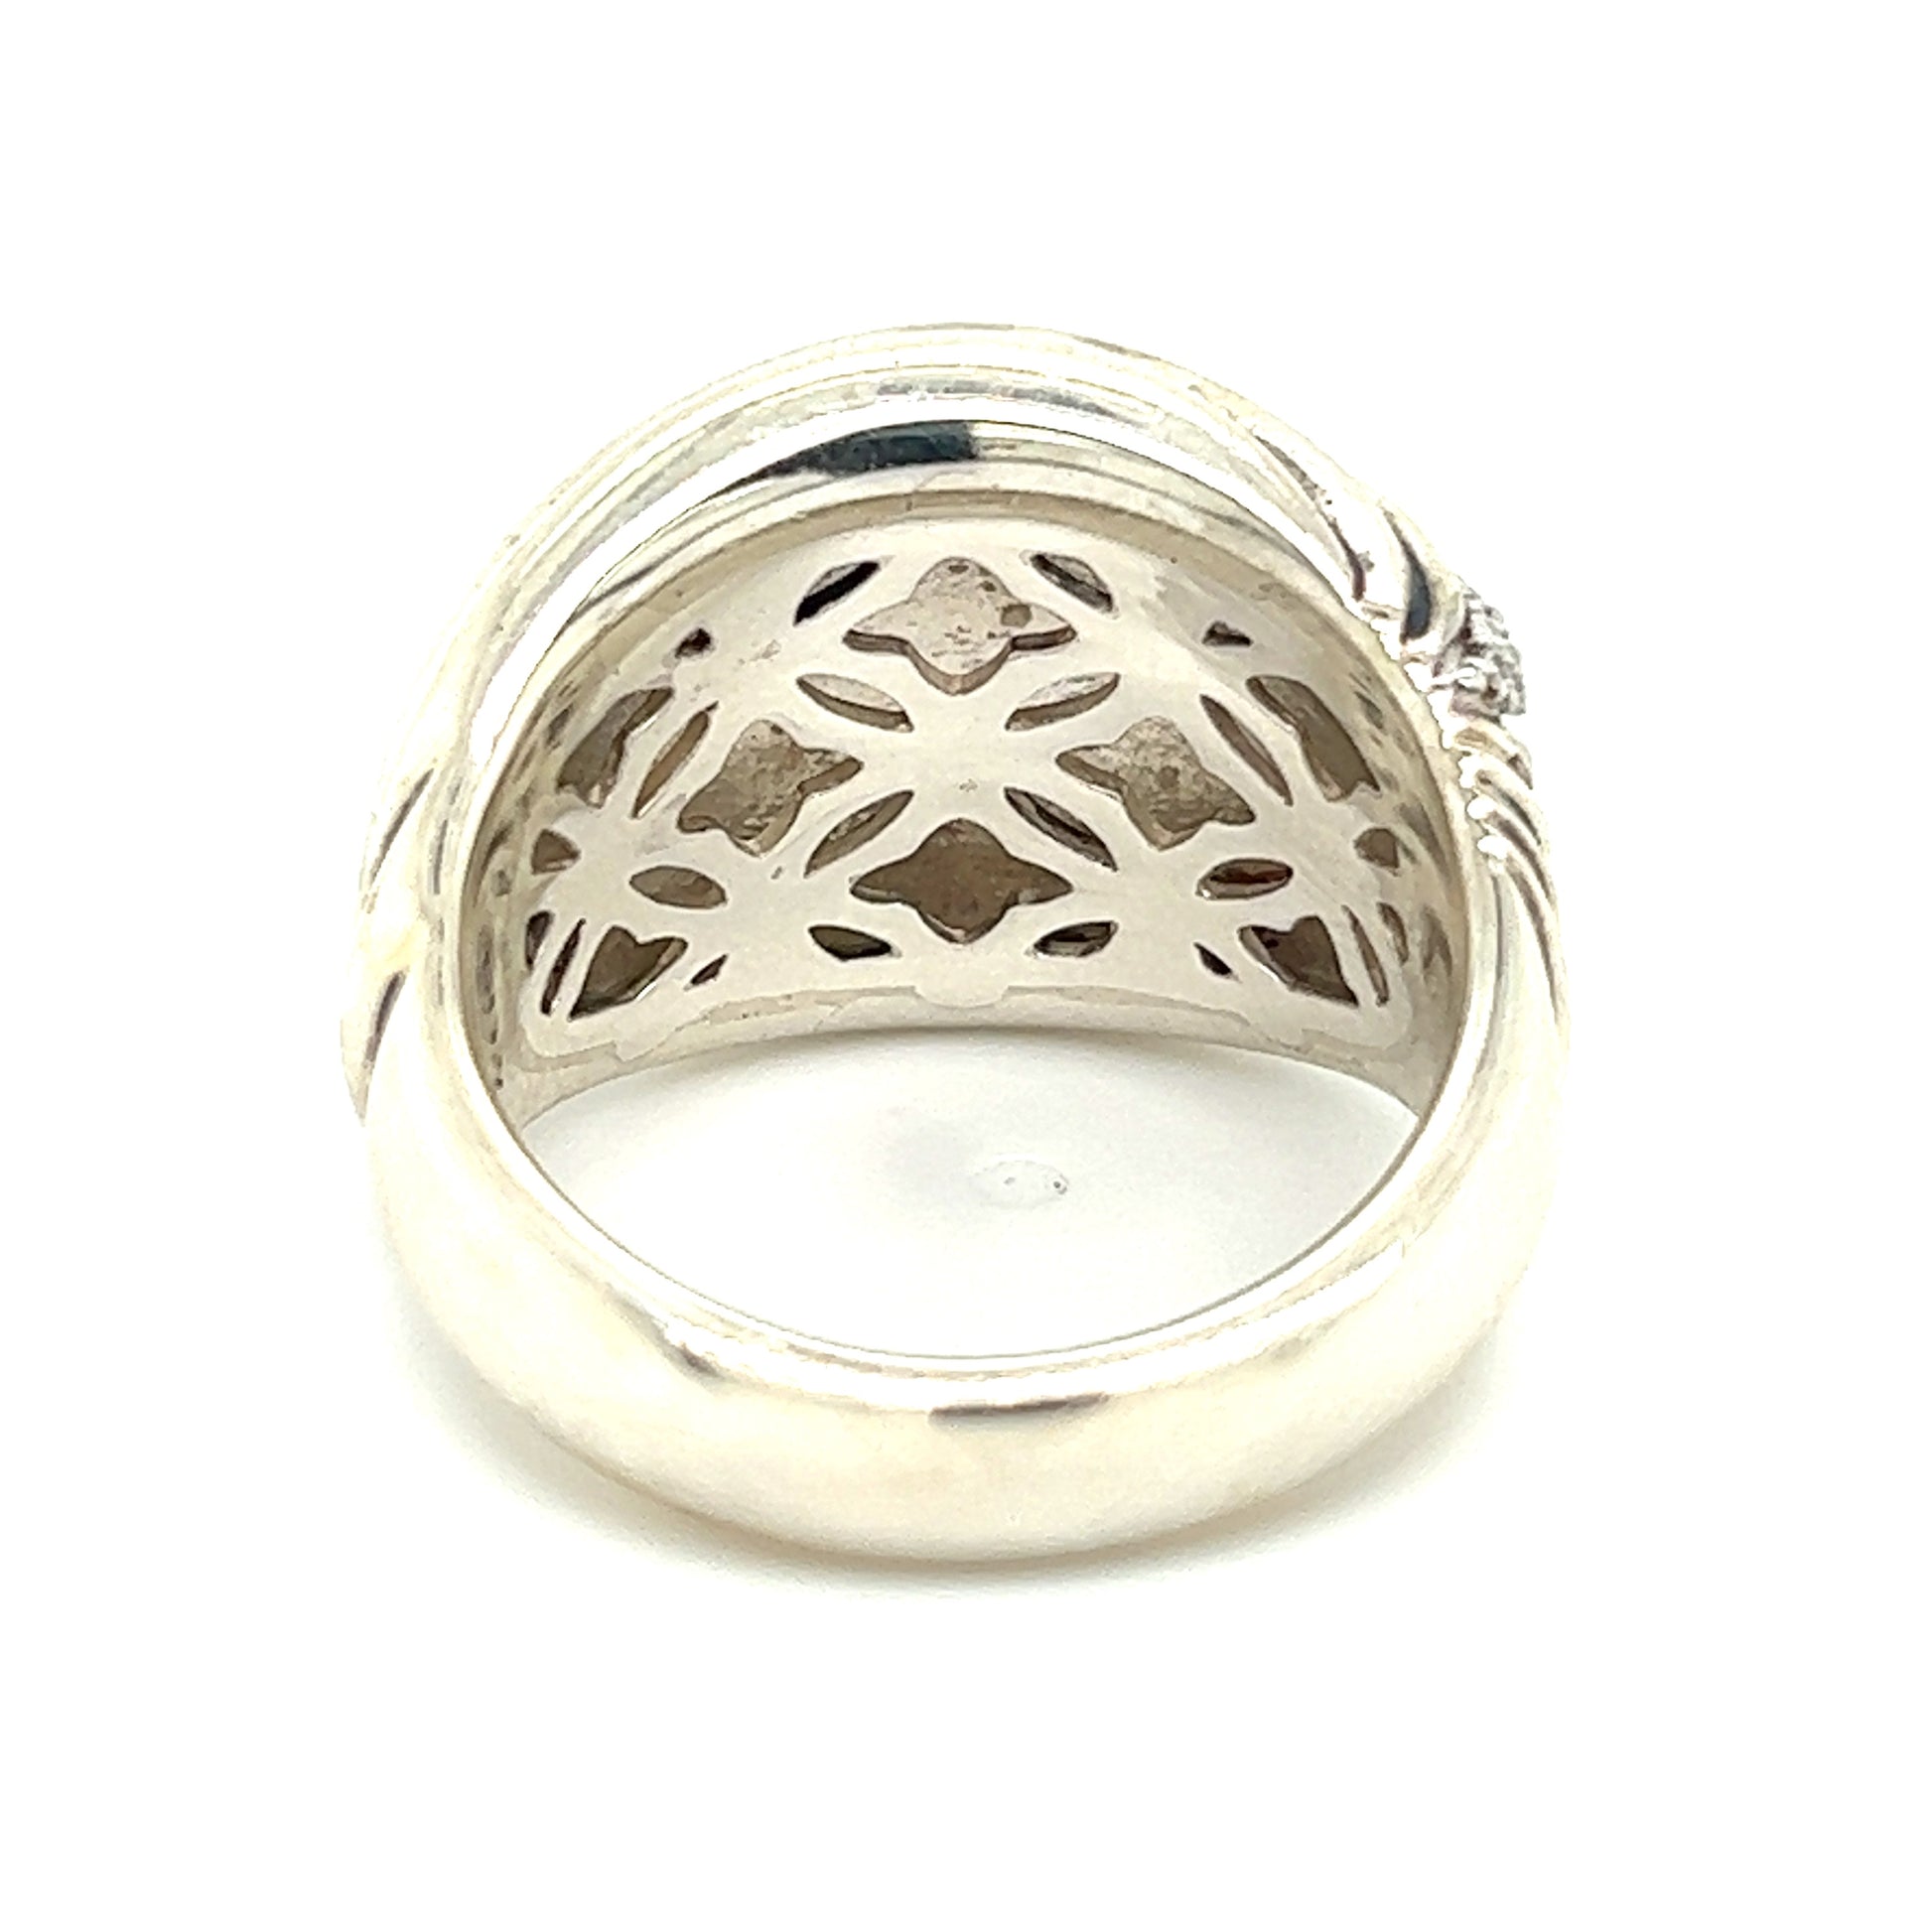 David Yurman Authentic Estate Diamond Sculpted Cable Ring 7.75 Silver DY210 - Certified Fine Jewelry